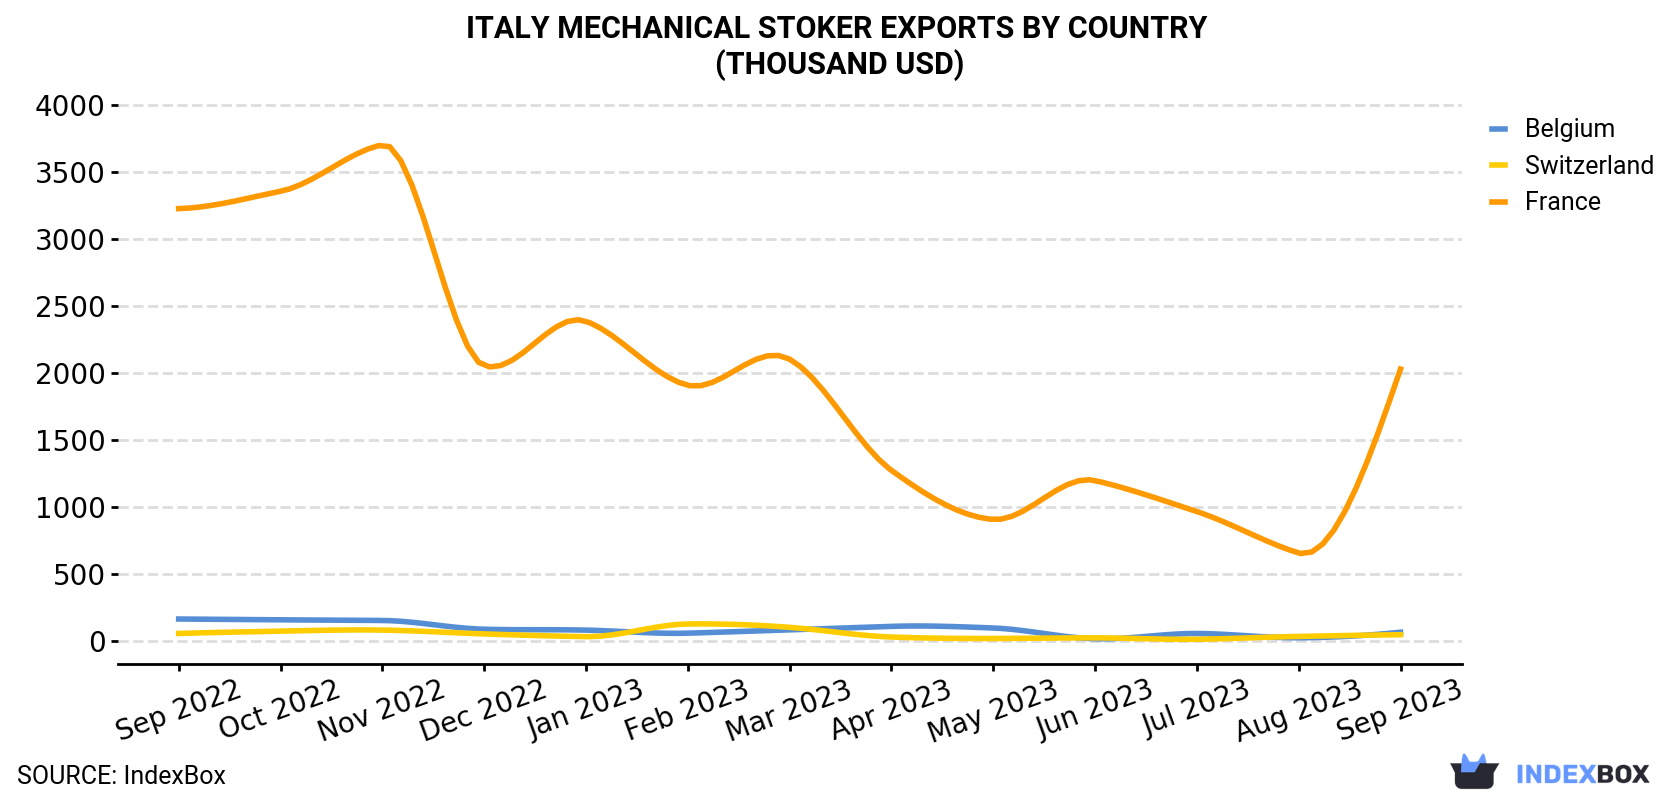 Italy Mechanical Stoker Exports By Country (Thousand USD)